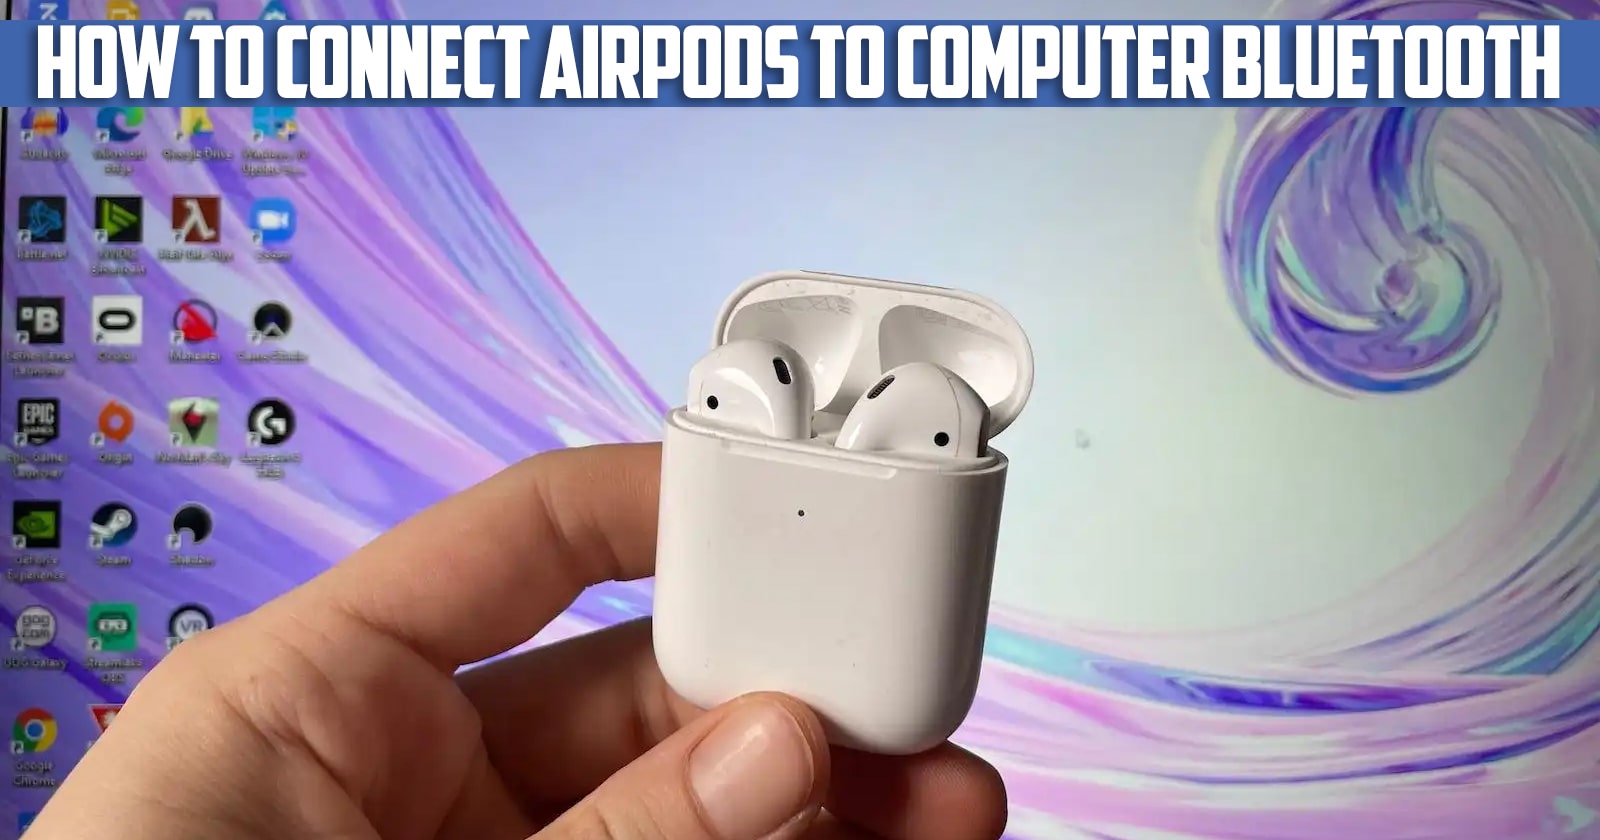 How to Connect AirPods to Computer Bluetooth